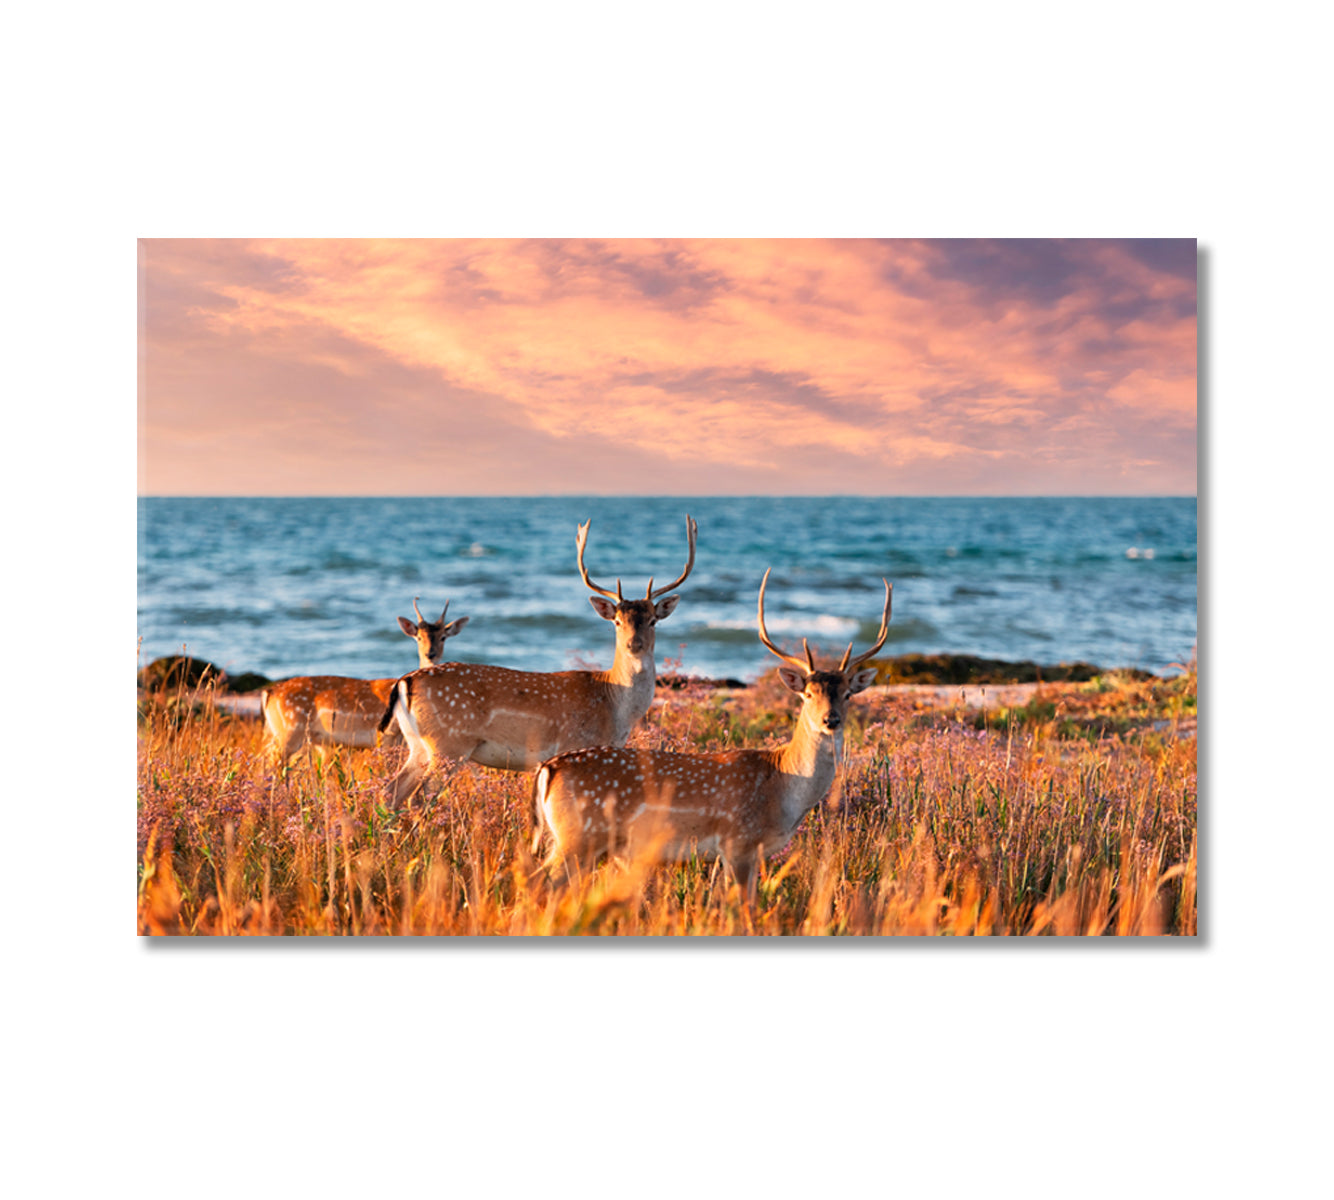 Sea Landscape with Sika Deer Family Canvas Print-Canvas Print-CetArt-1 Panel-24x16 inches-CetArt